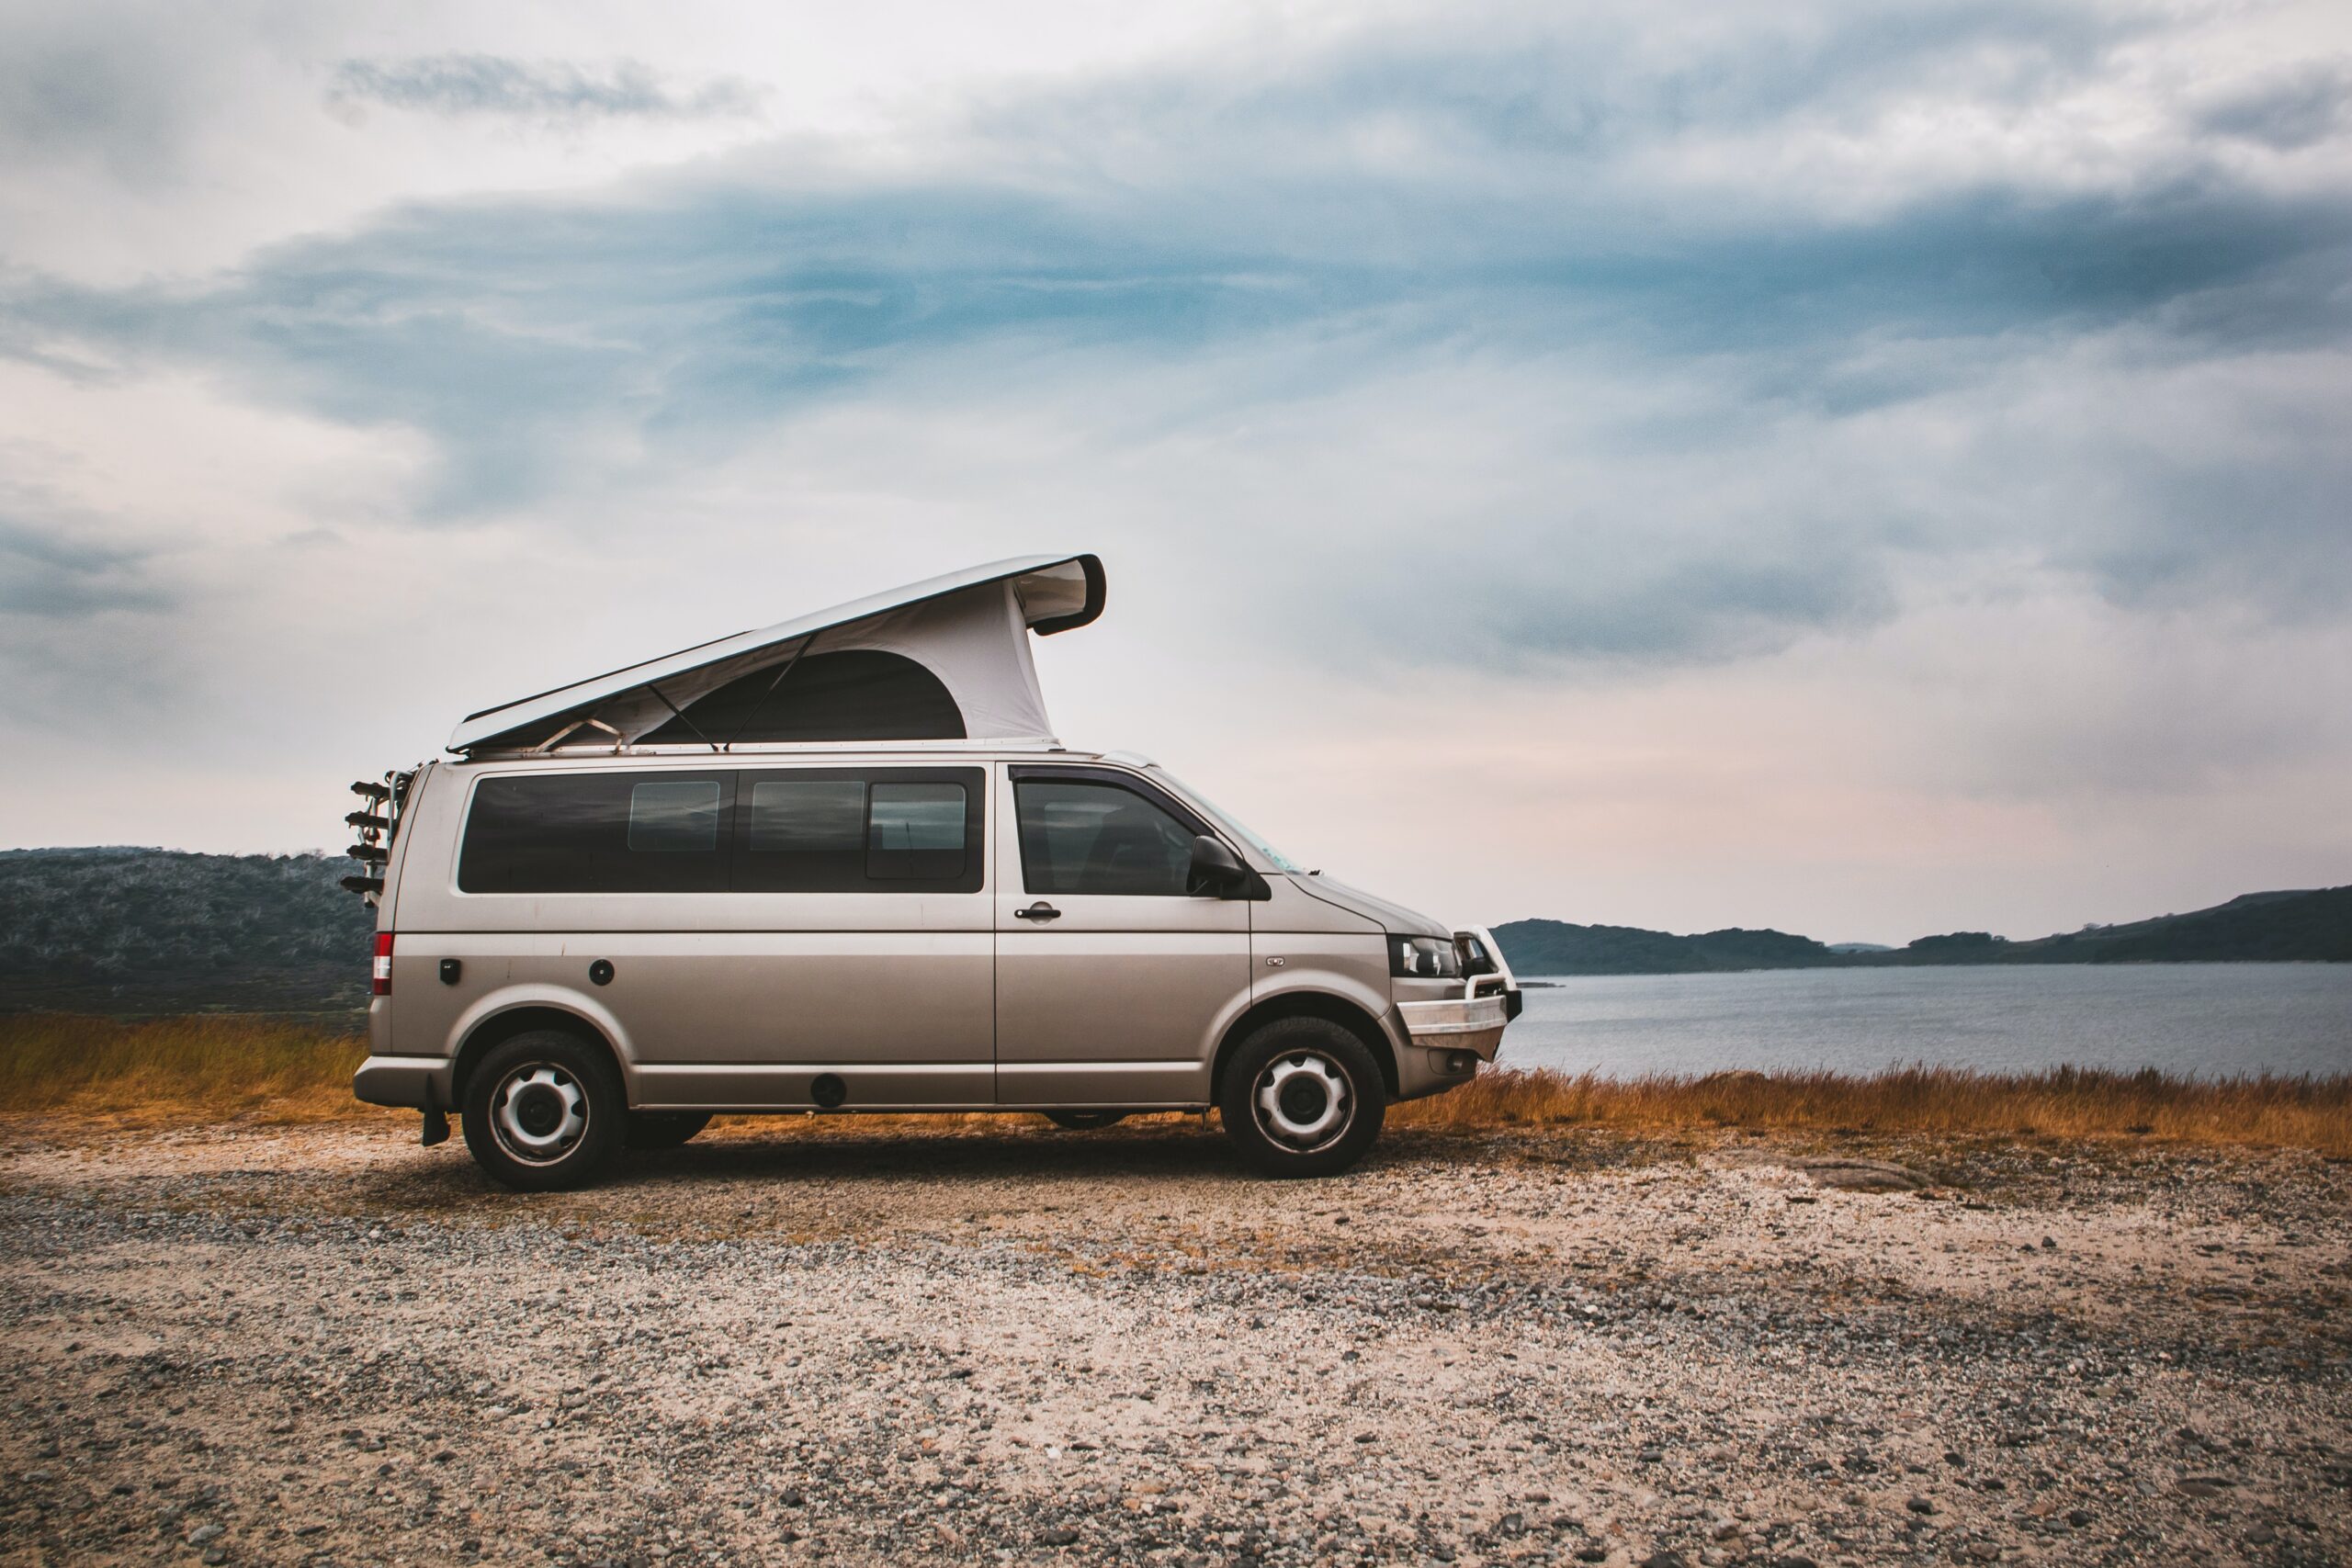 Business You Can Start With a Camper Van